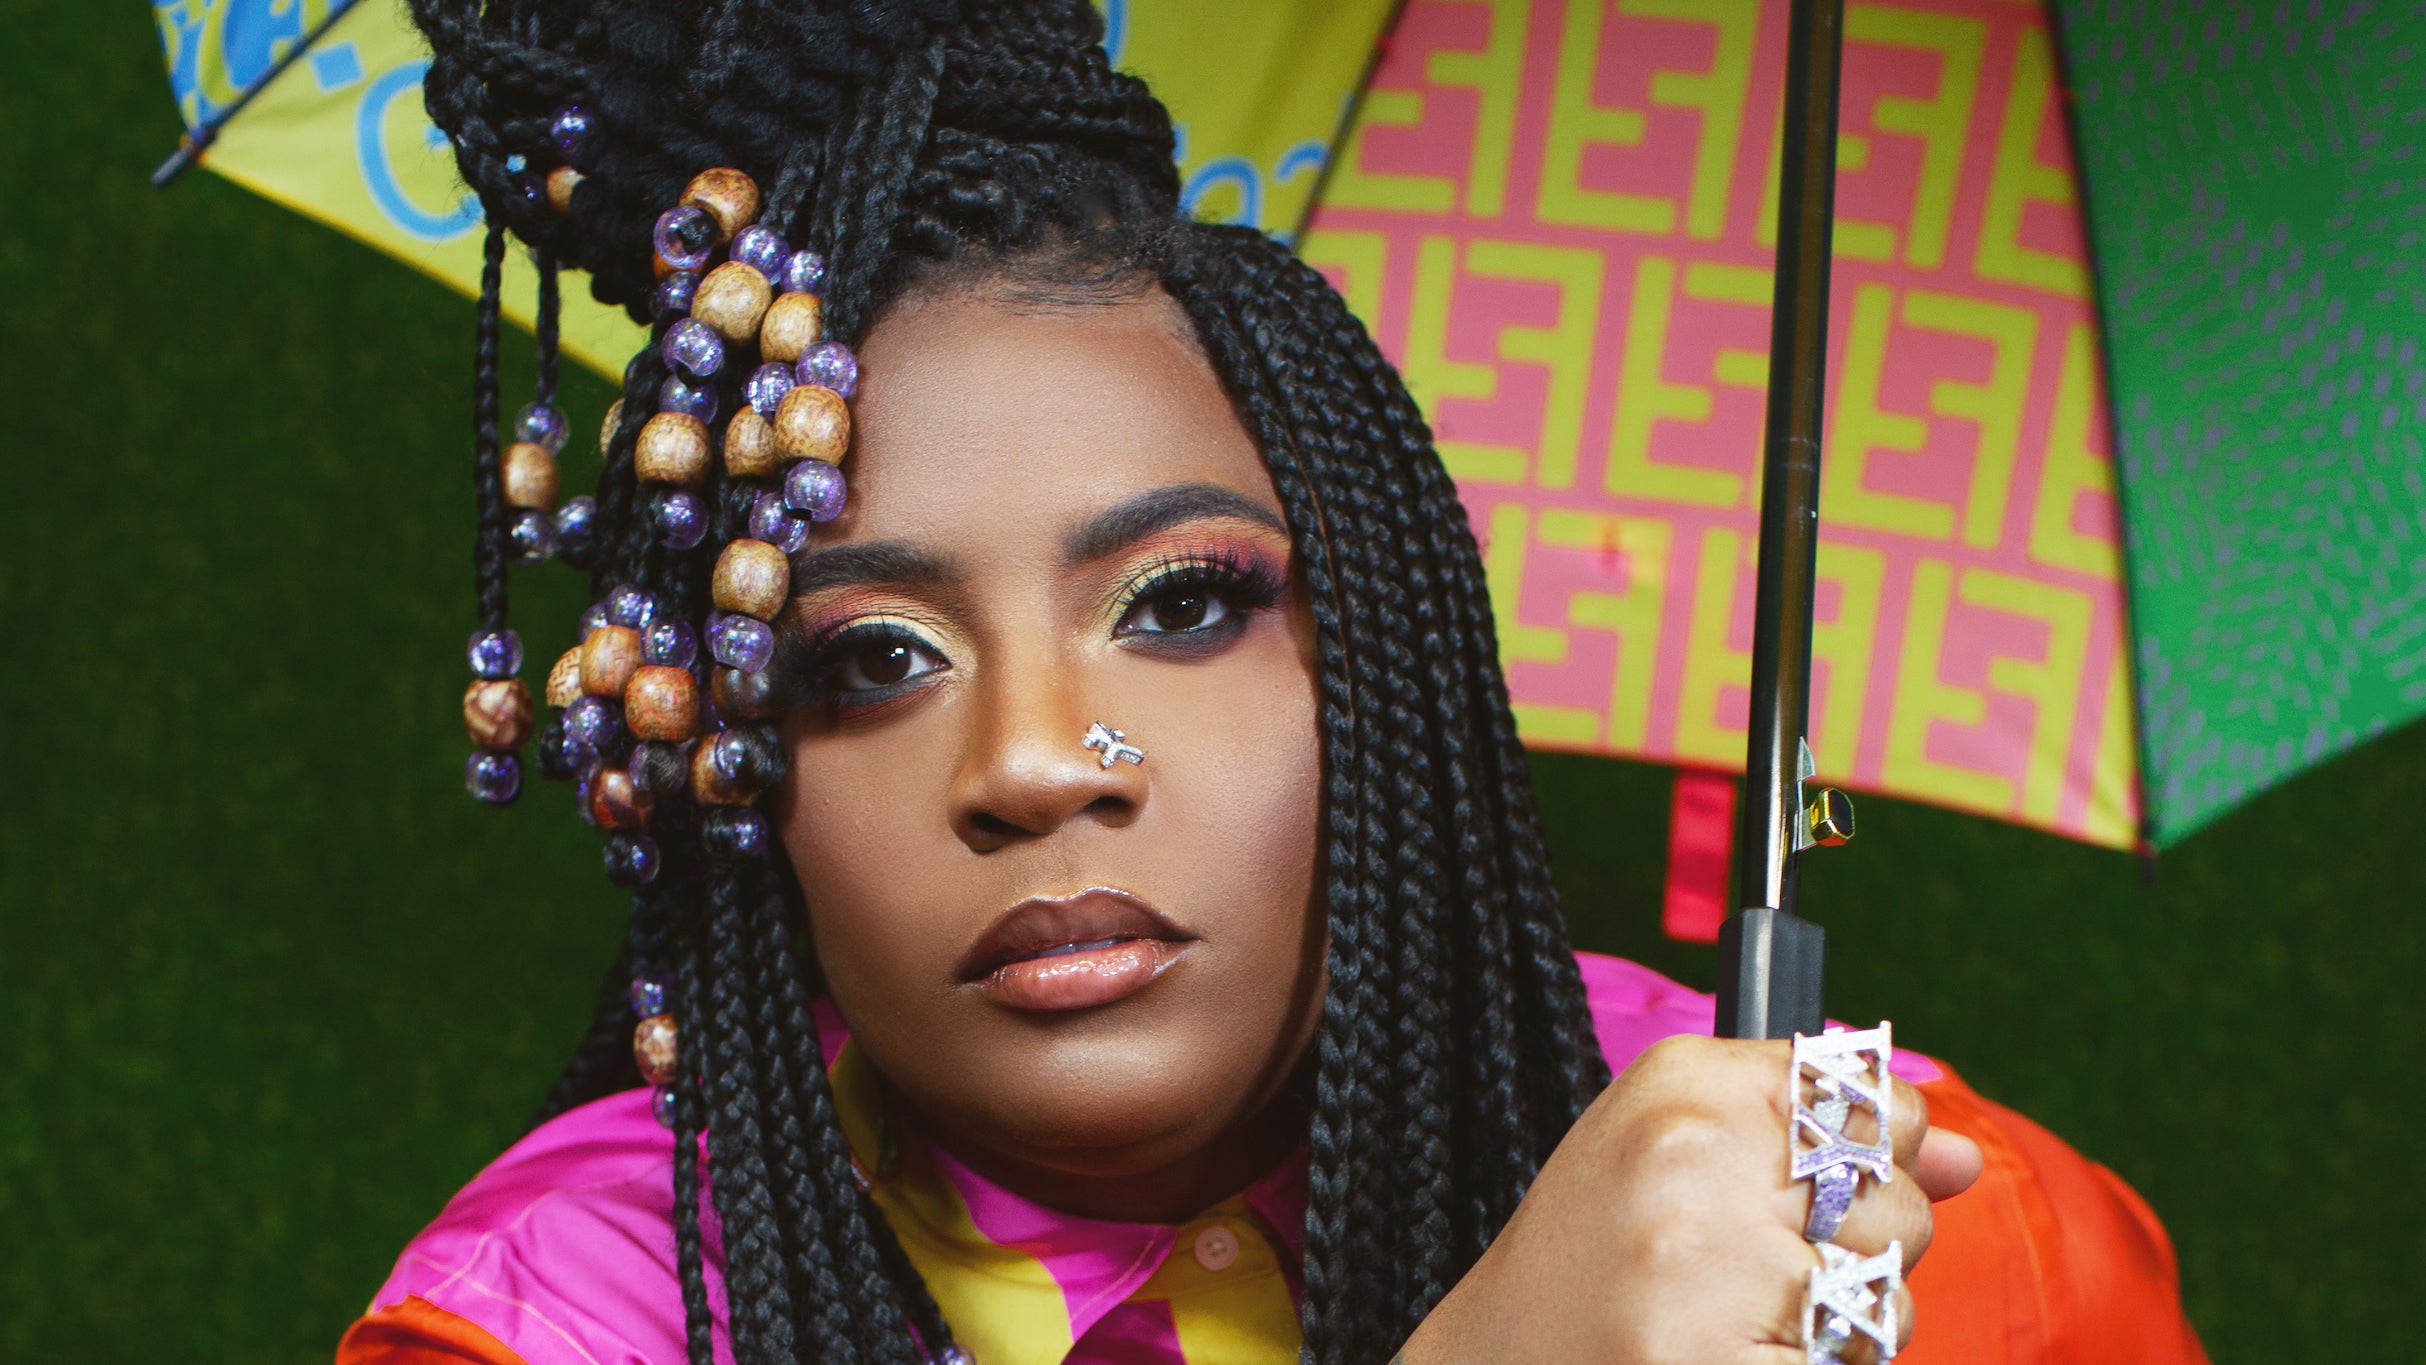 presale password for Kamaiyah - Another Summer Night Tour tickets in New York - NY (Mercury Lounge)